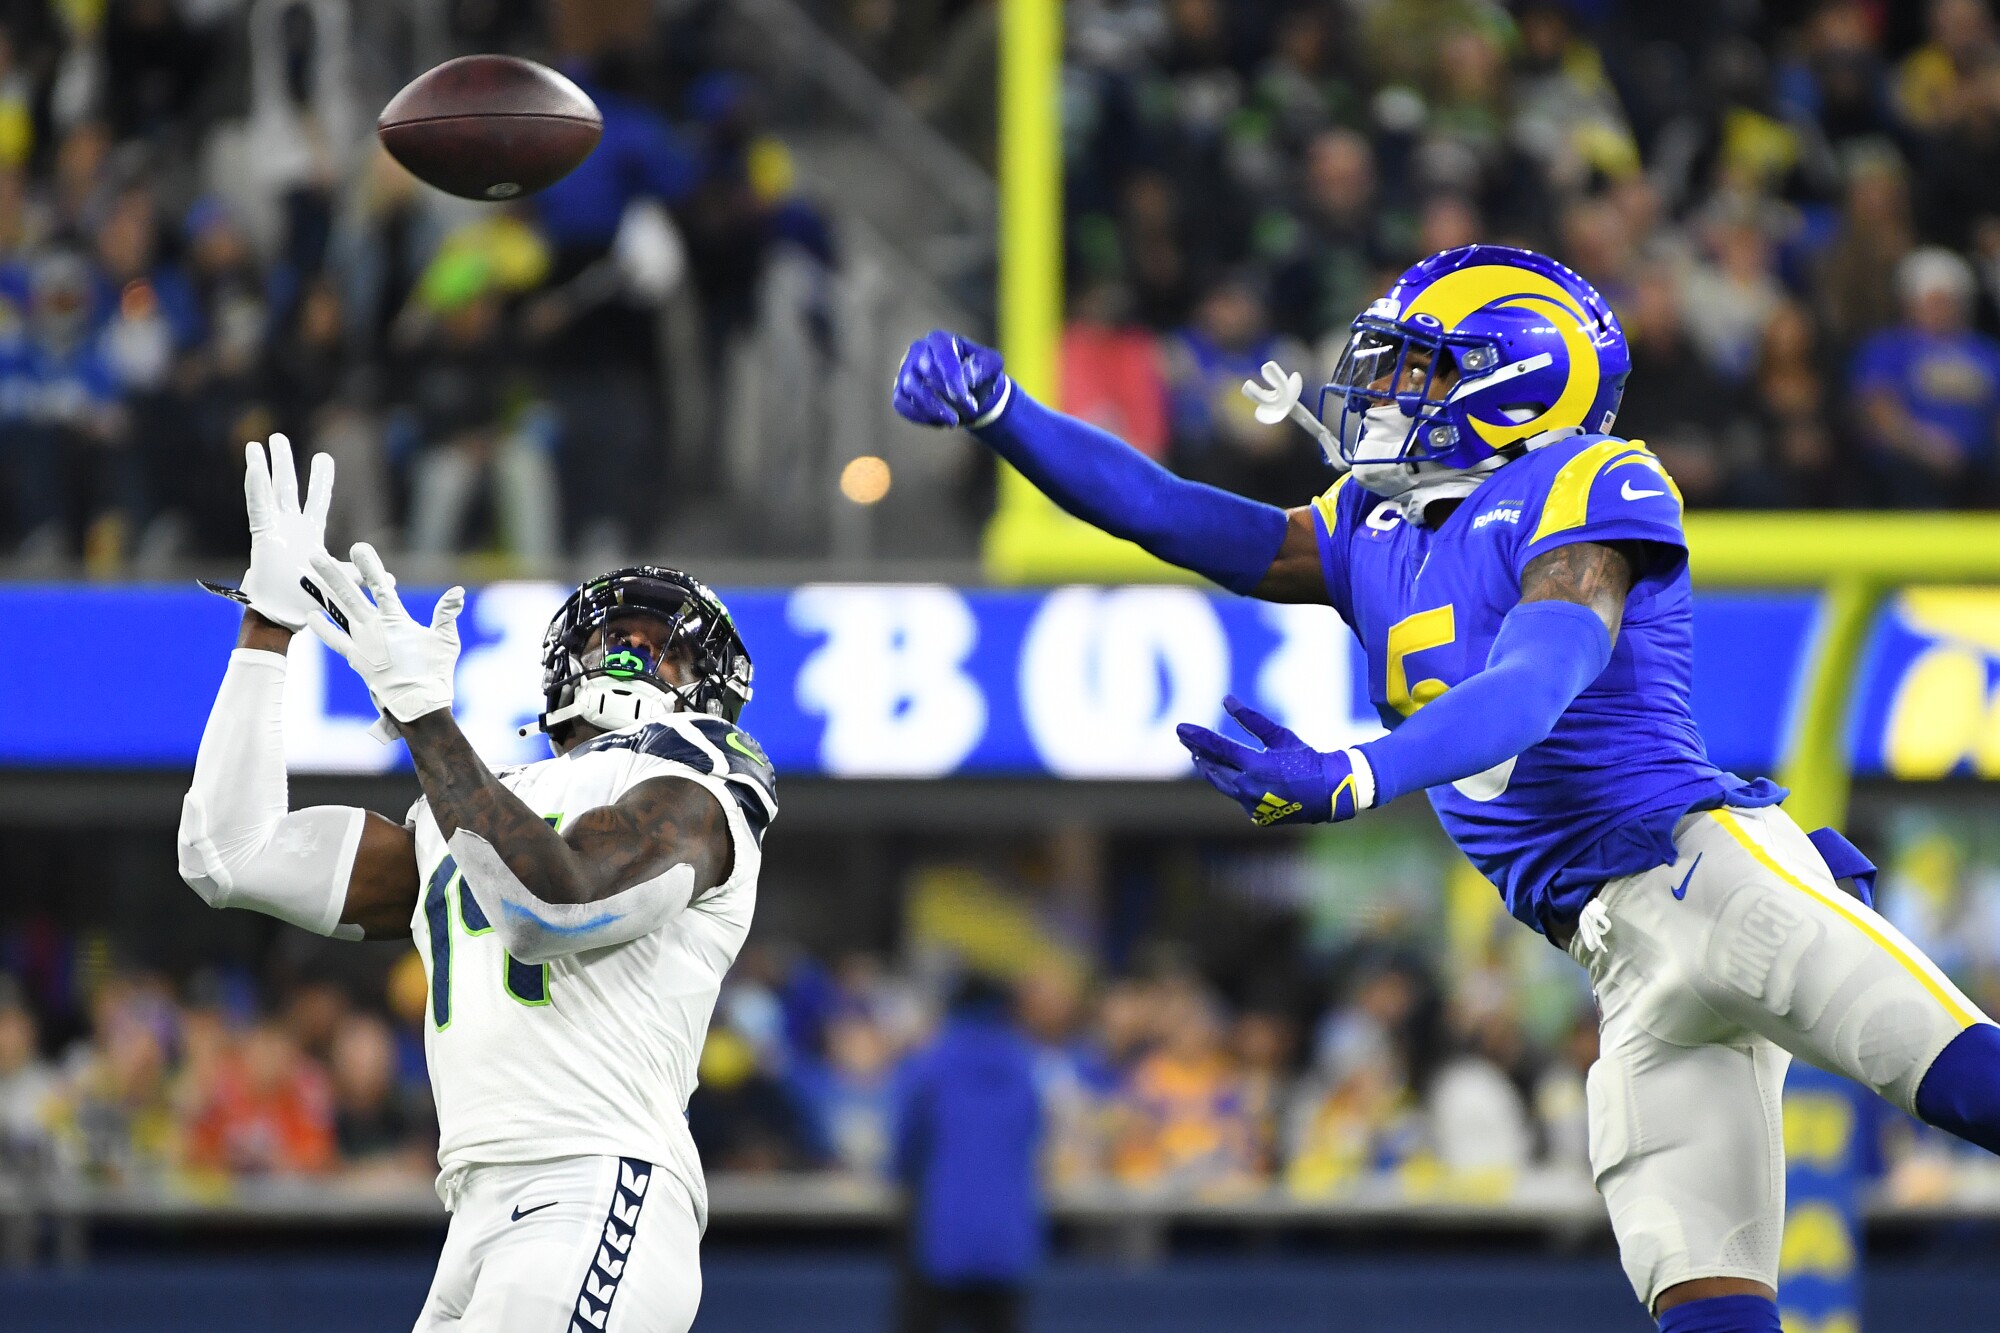 Rams cornerback Jalen Ramsey deflects a pass intended for Seahawks receiver DK Metcalf.